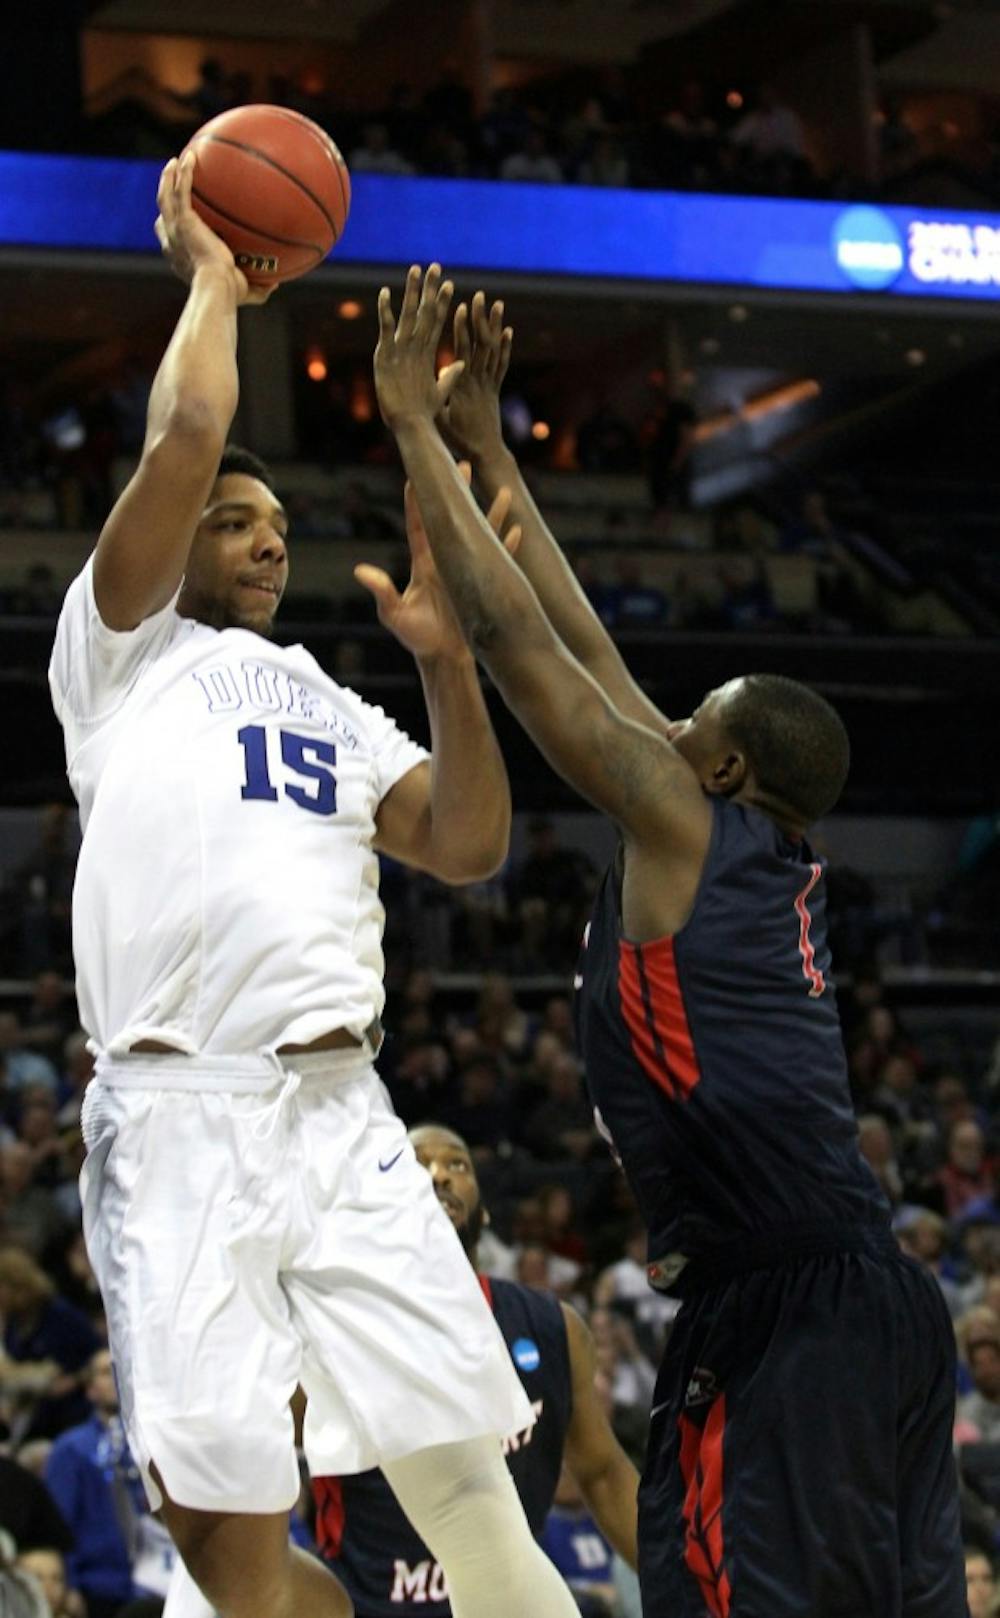 Jahlil Okafor went for 21 points on 9-of-11 shooting in his NCAA tournament debut against Robert Morris Friday.